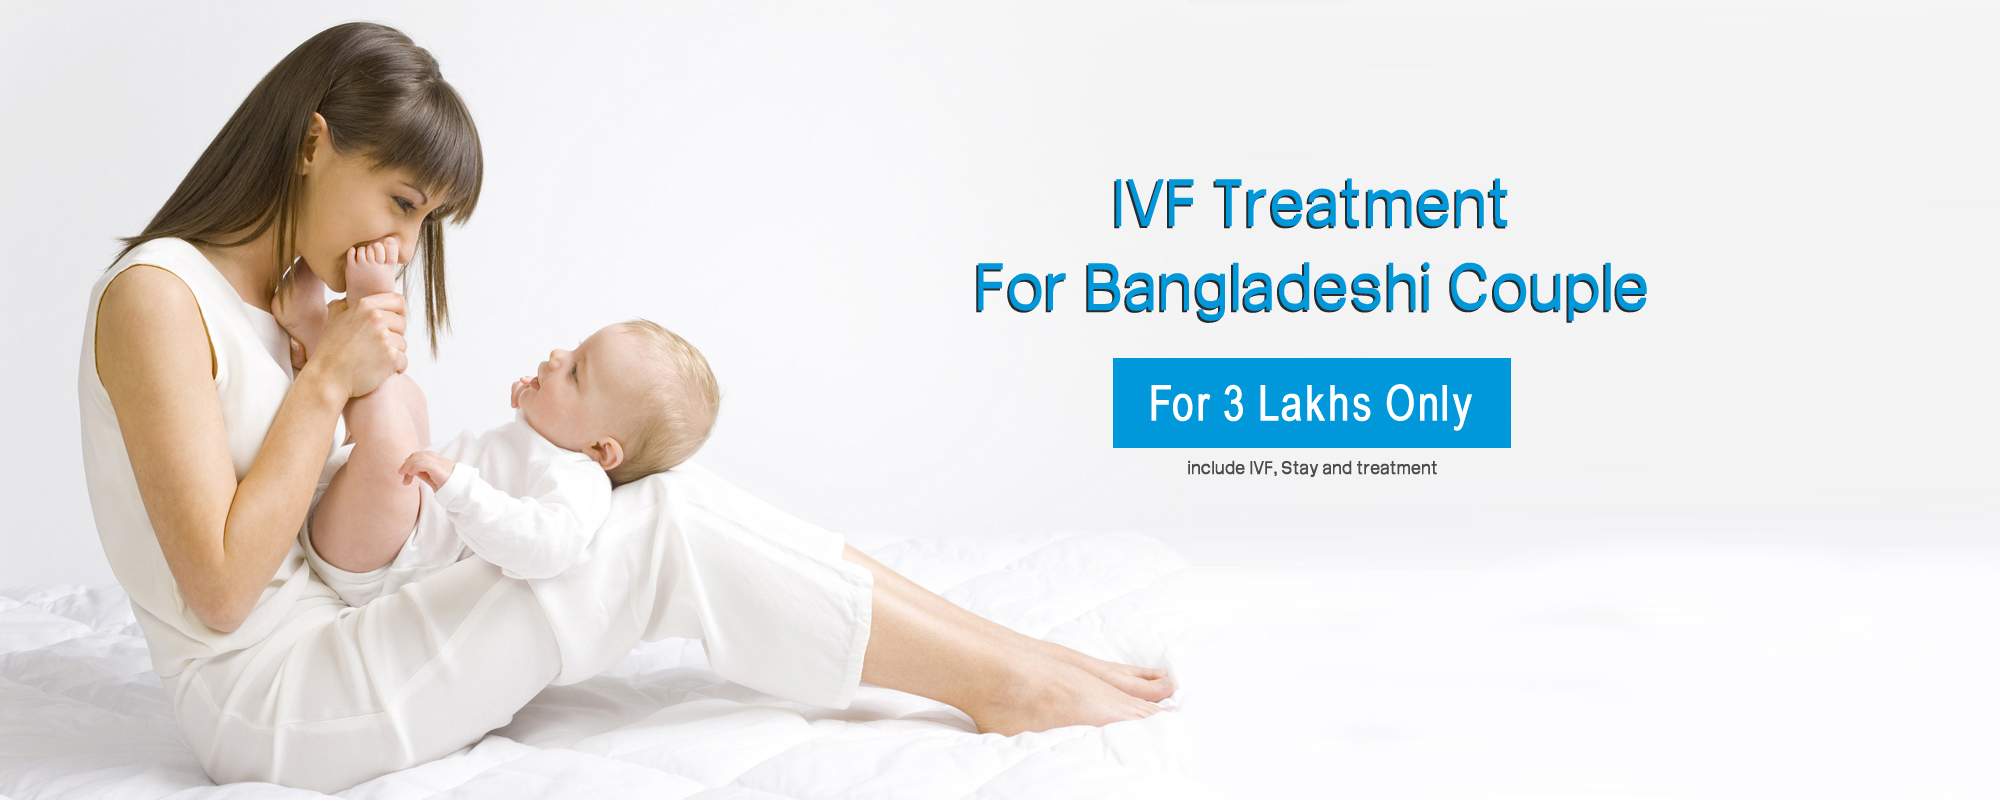 IVF Treatment For Bangladeshi Couple For 3 Lakhs Only 2